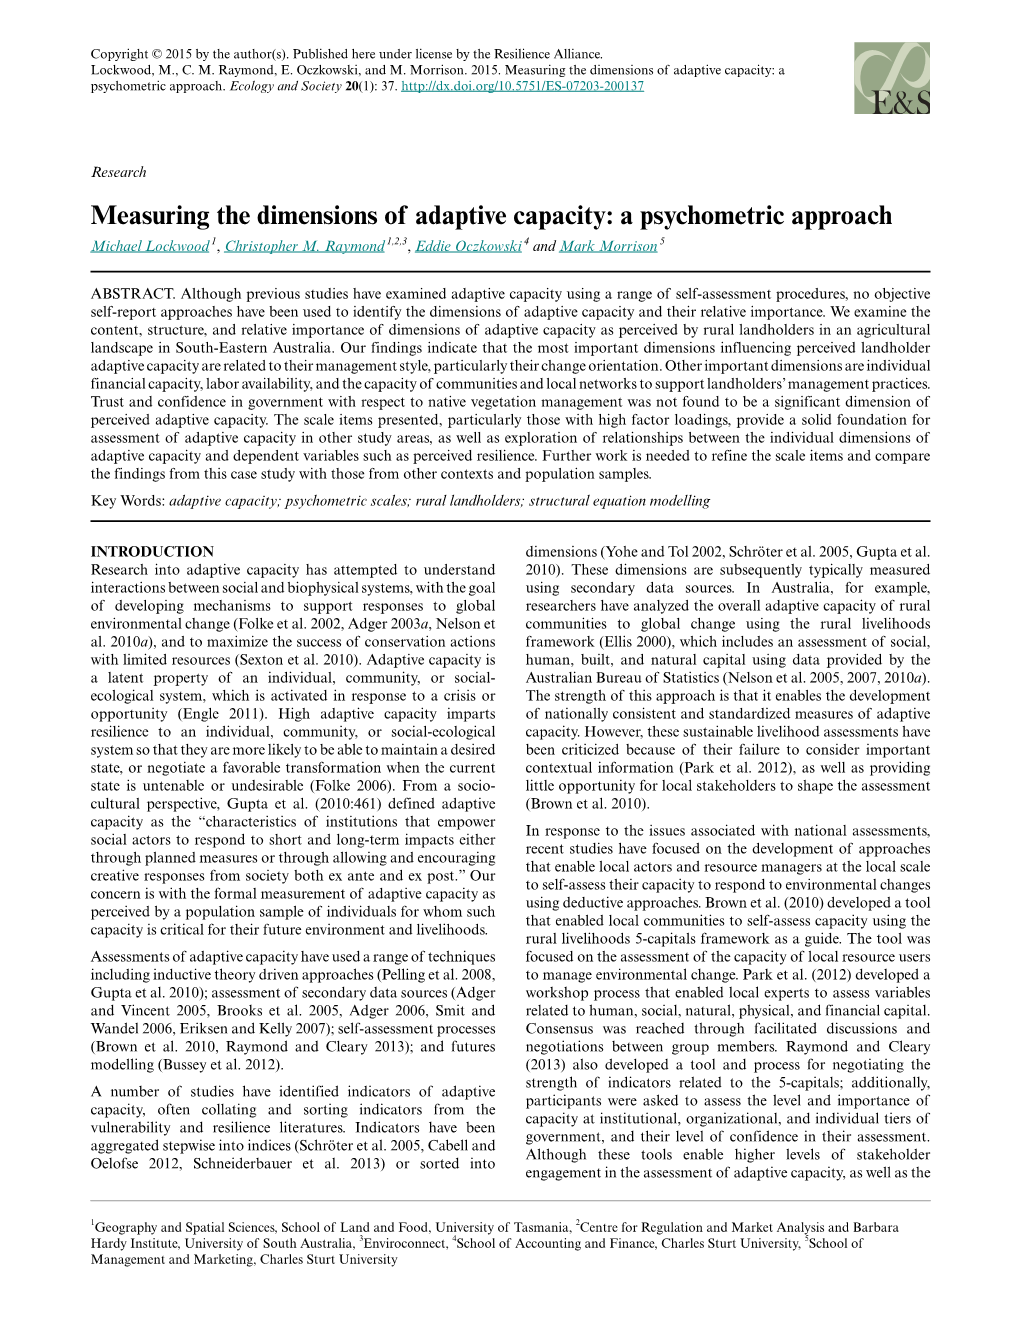 Measuring the Dimensions of Adaptive Capacity: a Psychometric Approach